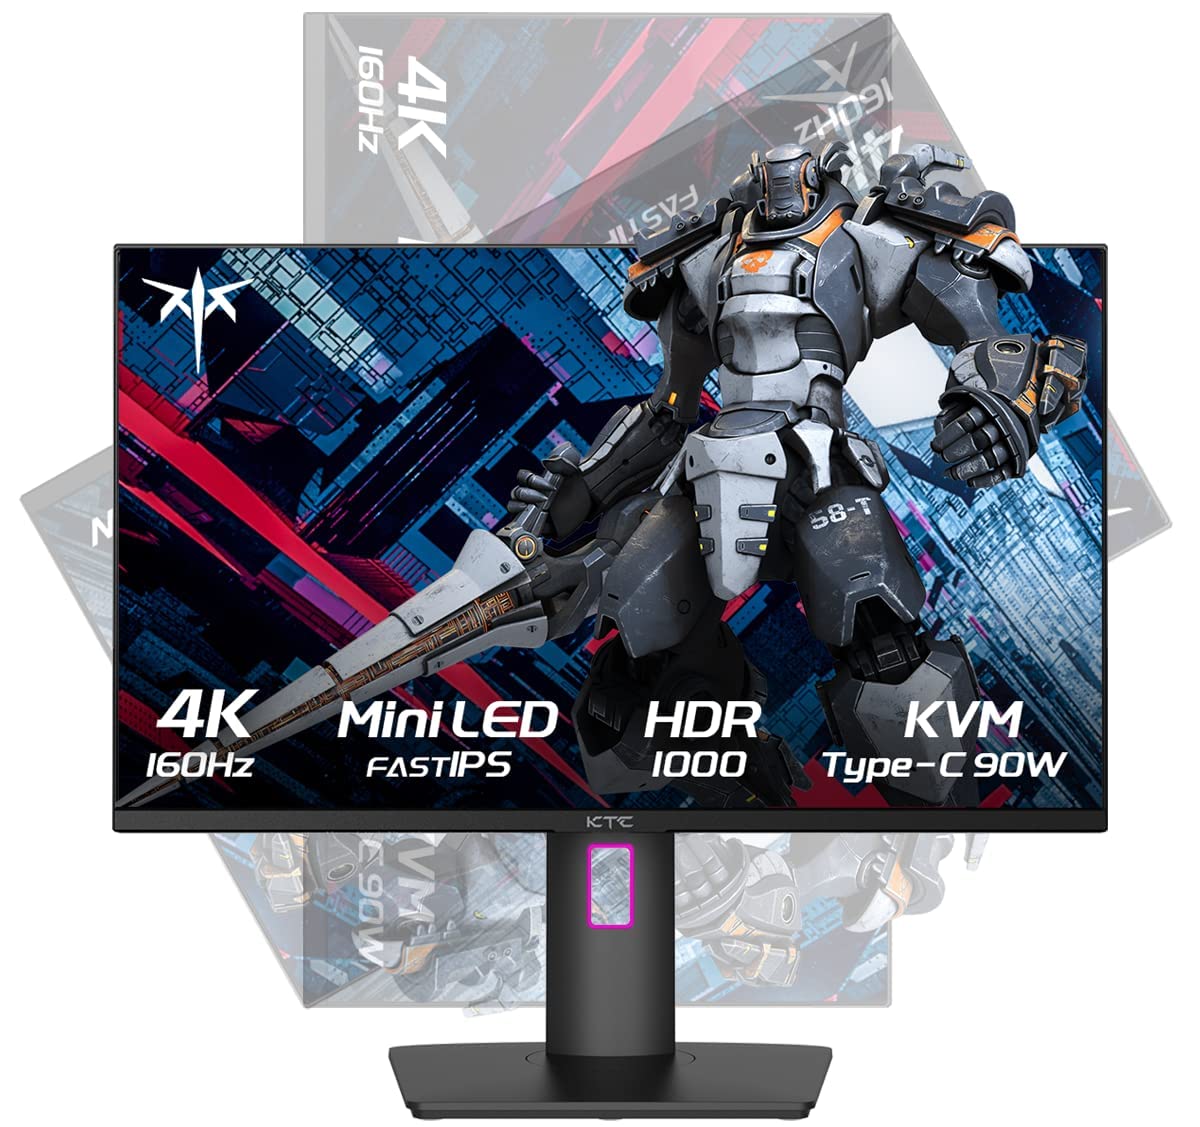 KTC 27 Inch 4K Gaming Monitor, Mini LED Monitor, Fast IPS, HDR1000, Built-in Speakers, HDMI2.1, DP1.4, Type-C 90W, 160Hz/144Hz Computer Monitor, Vesa Wall Mount PC Monitor (4K 160Hz Mini LED)